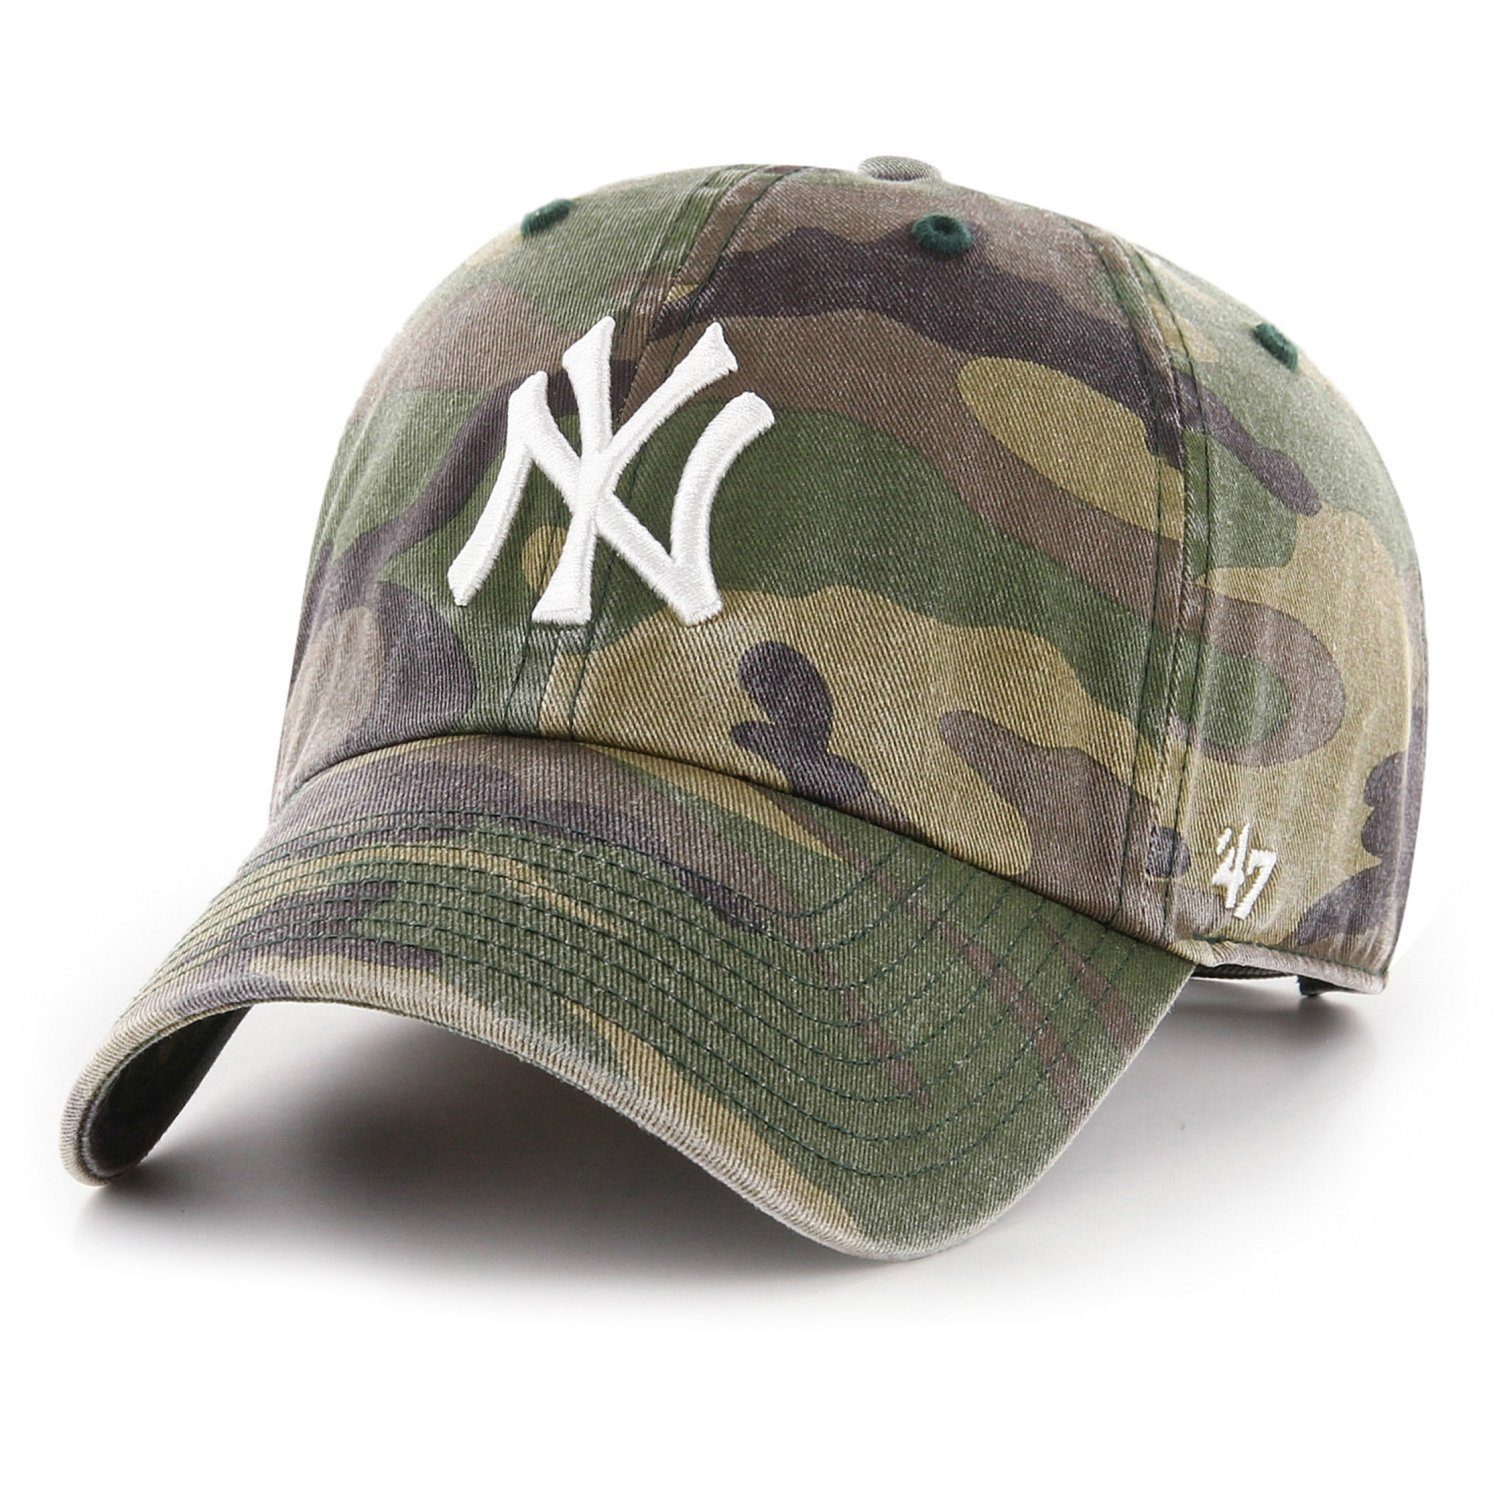 '47 Brand Baseball Cap Relaxed Fit WASHED New York Yankees